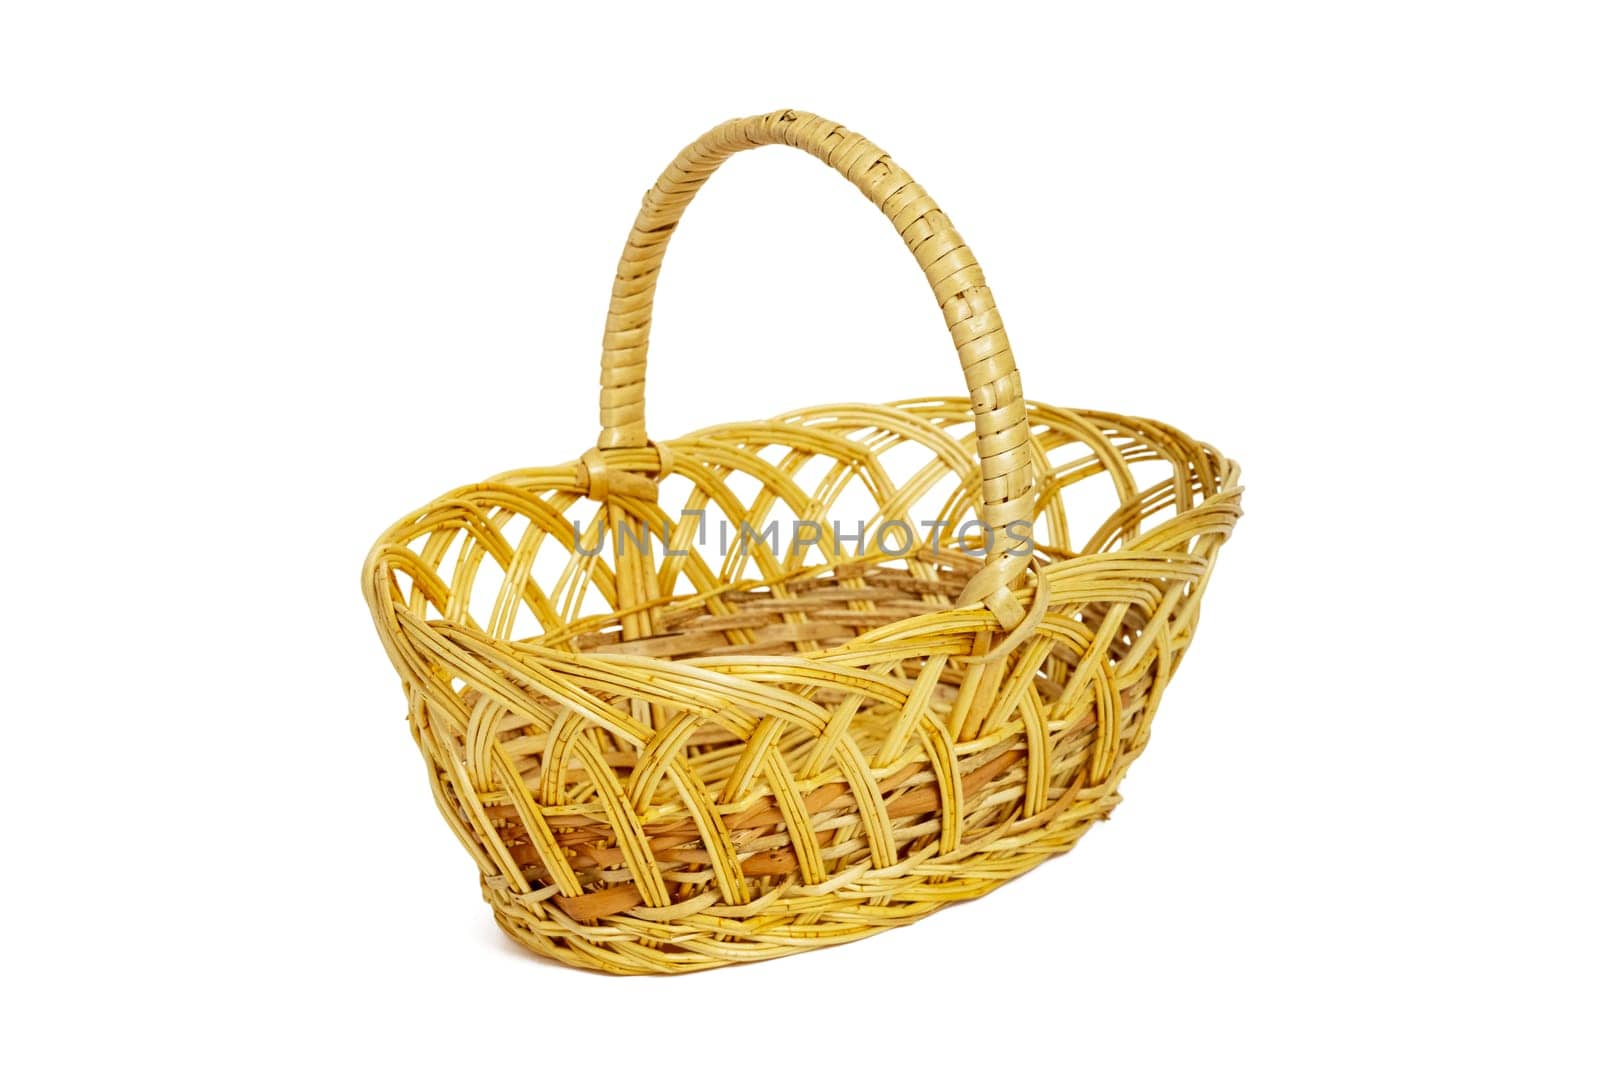 An empty wicker basket isolated on white background. Easter item.